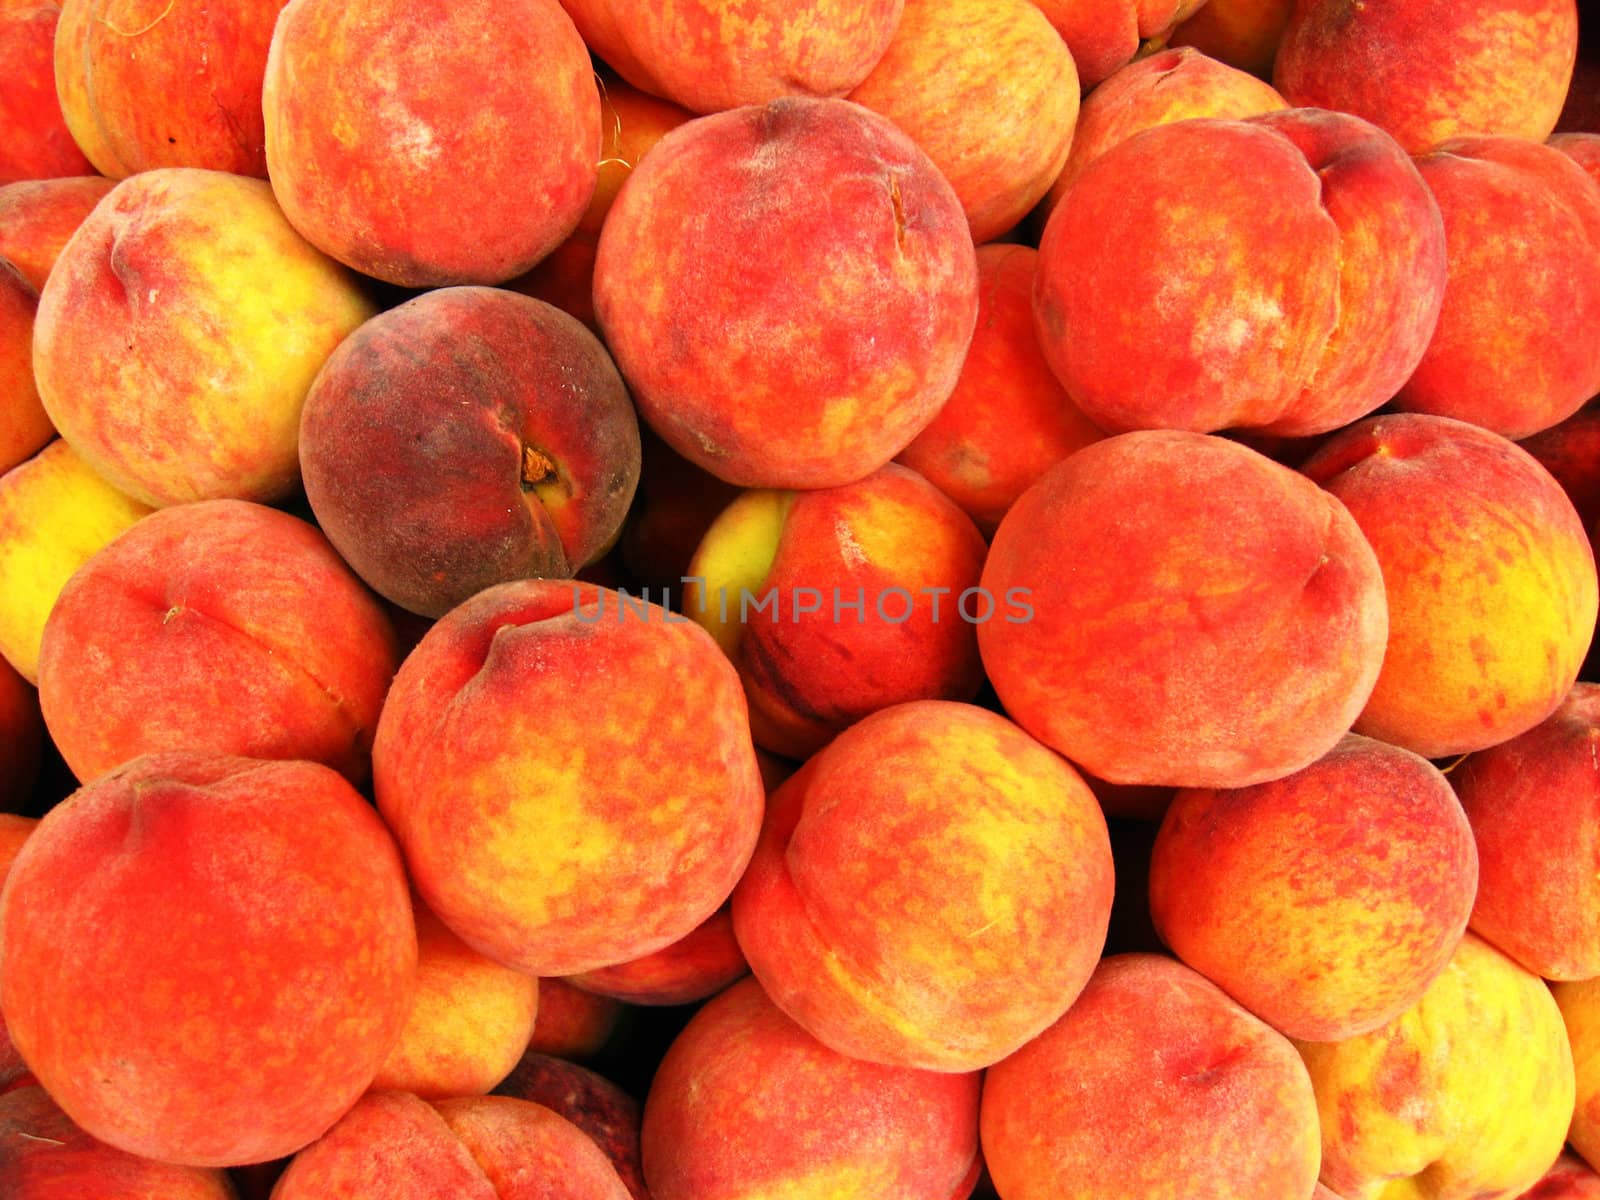 Many bright tasty peaches laying in the market